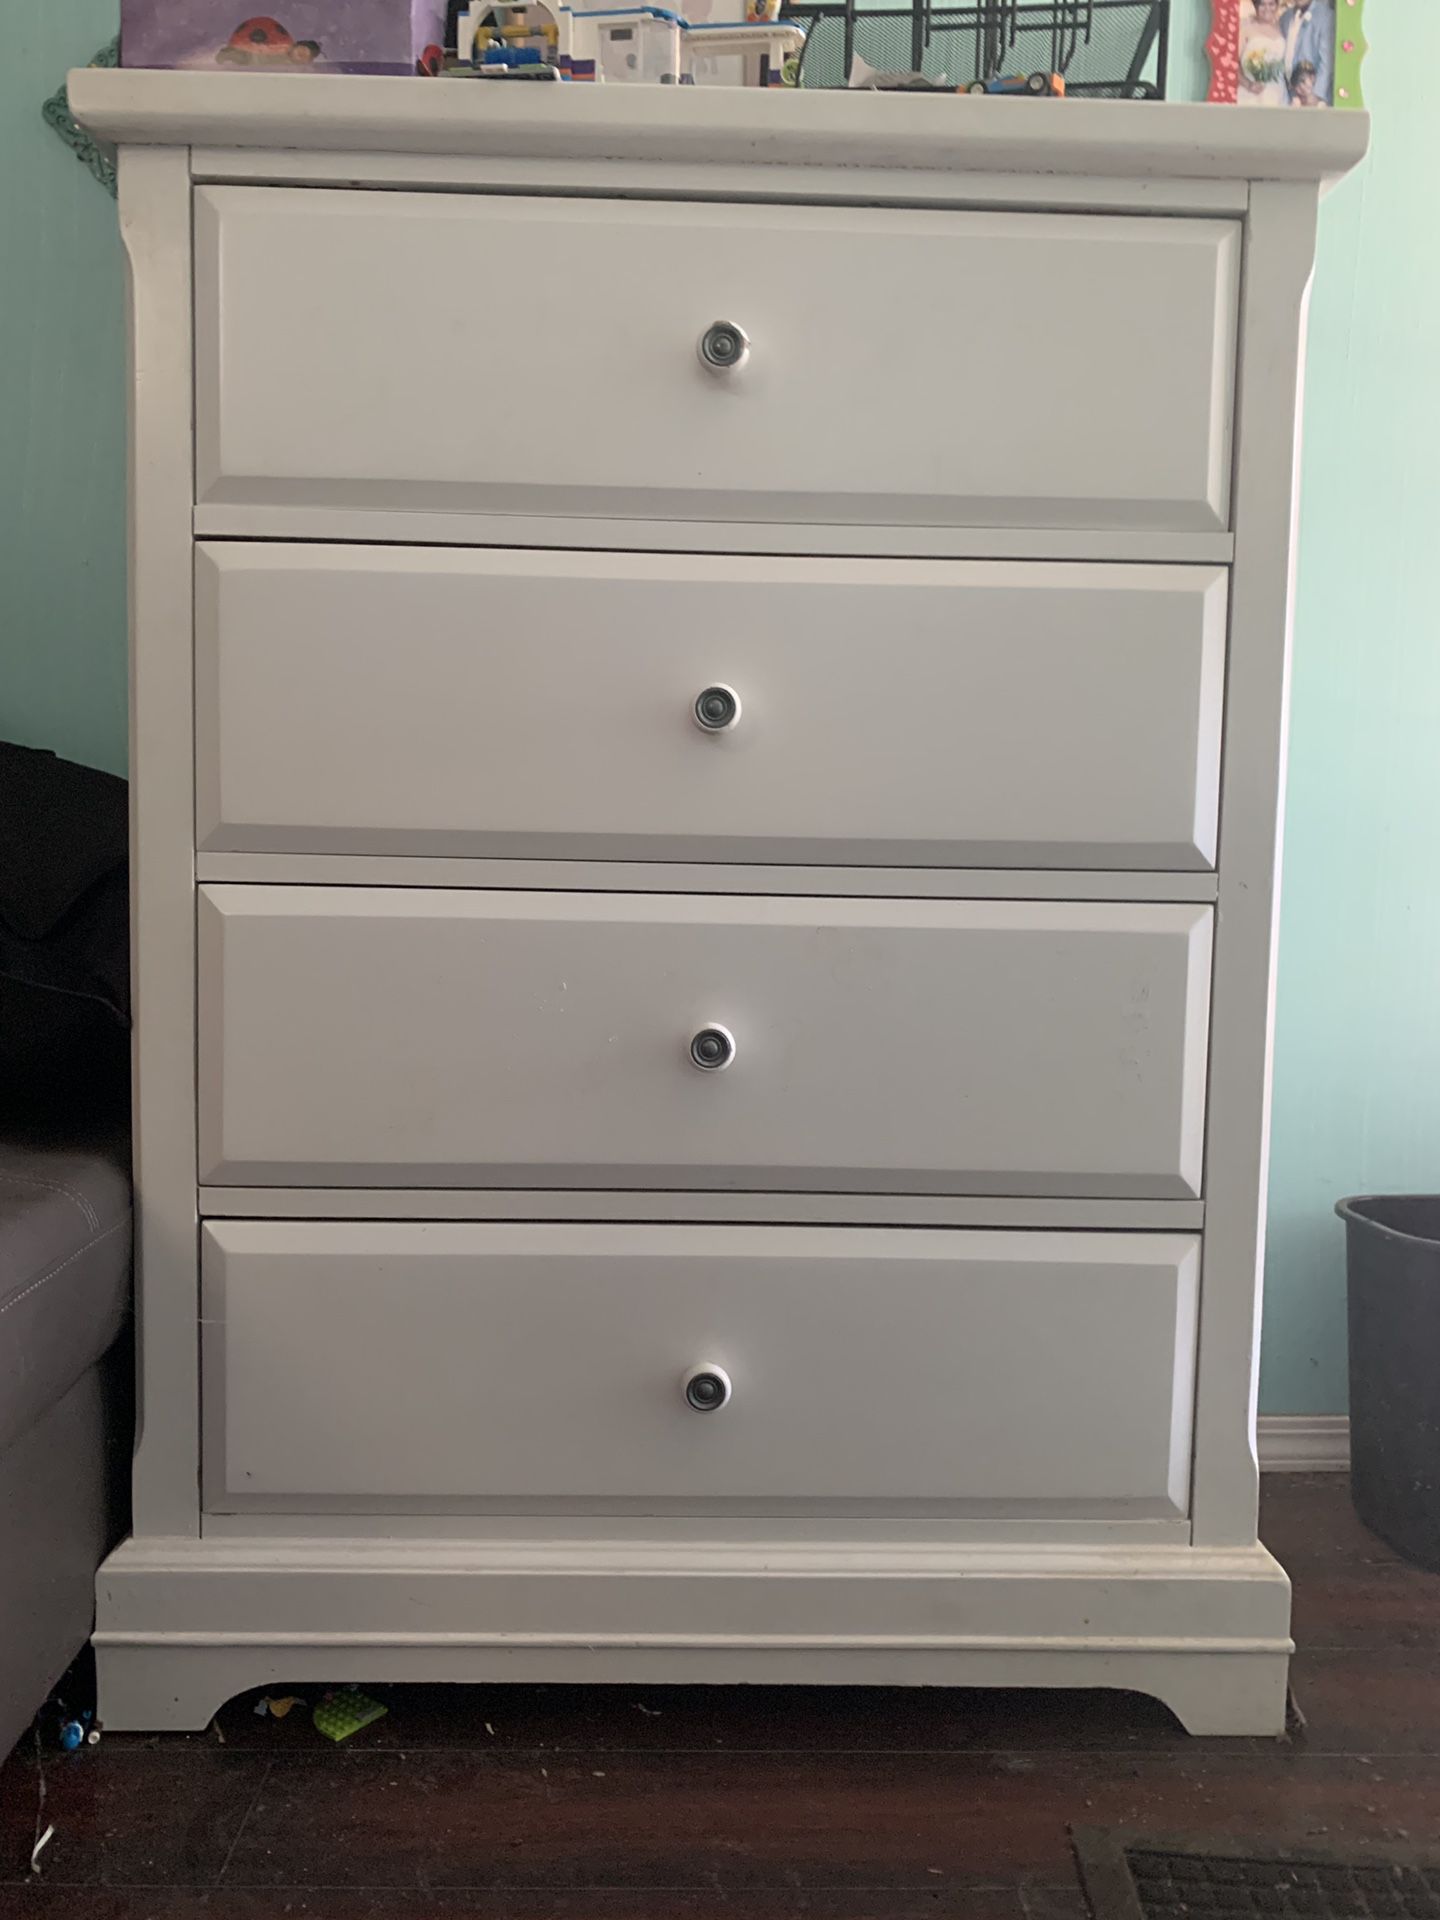 Solid wood white dresser for Sale in Whittier, CA - OfferUp